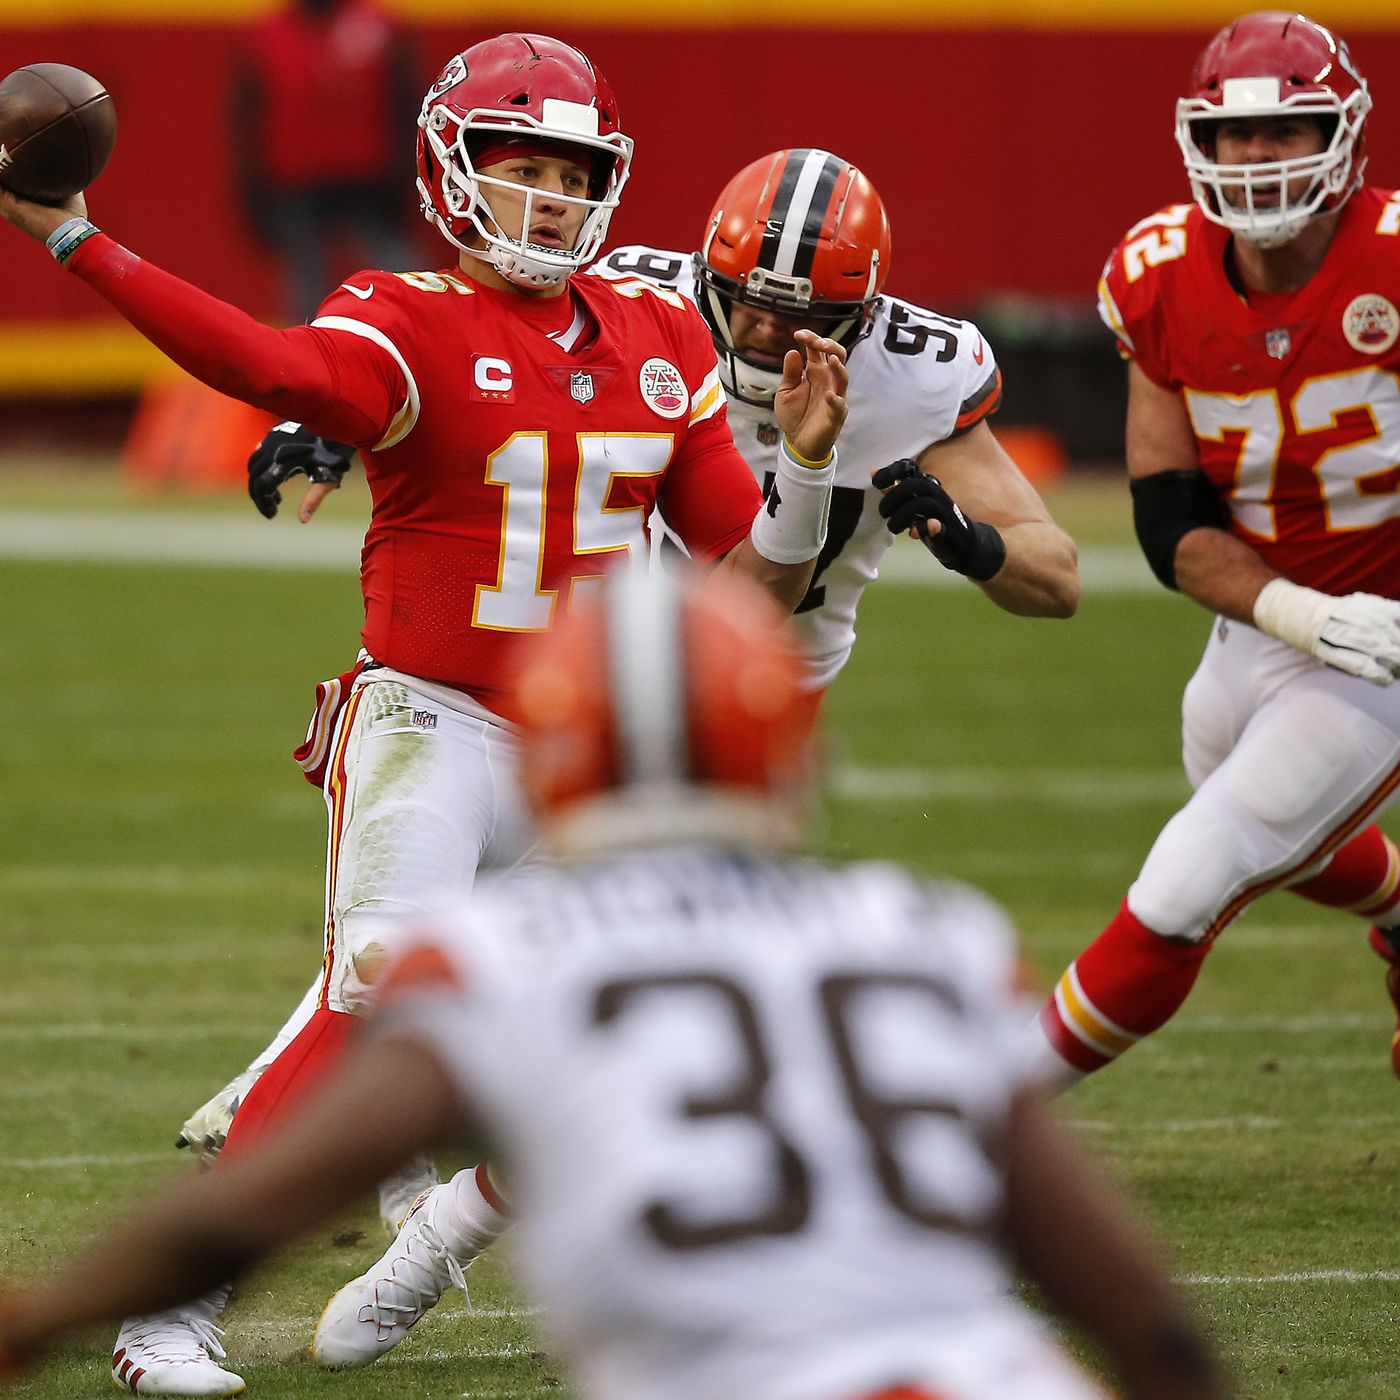 Browns vs. Chiefs 2021: game time, TV schedule, how to watch